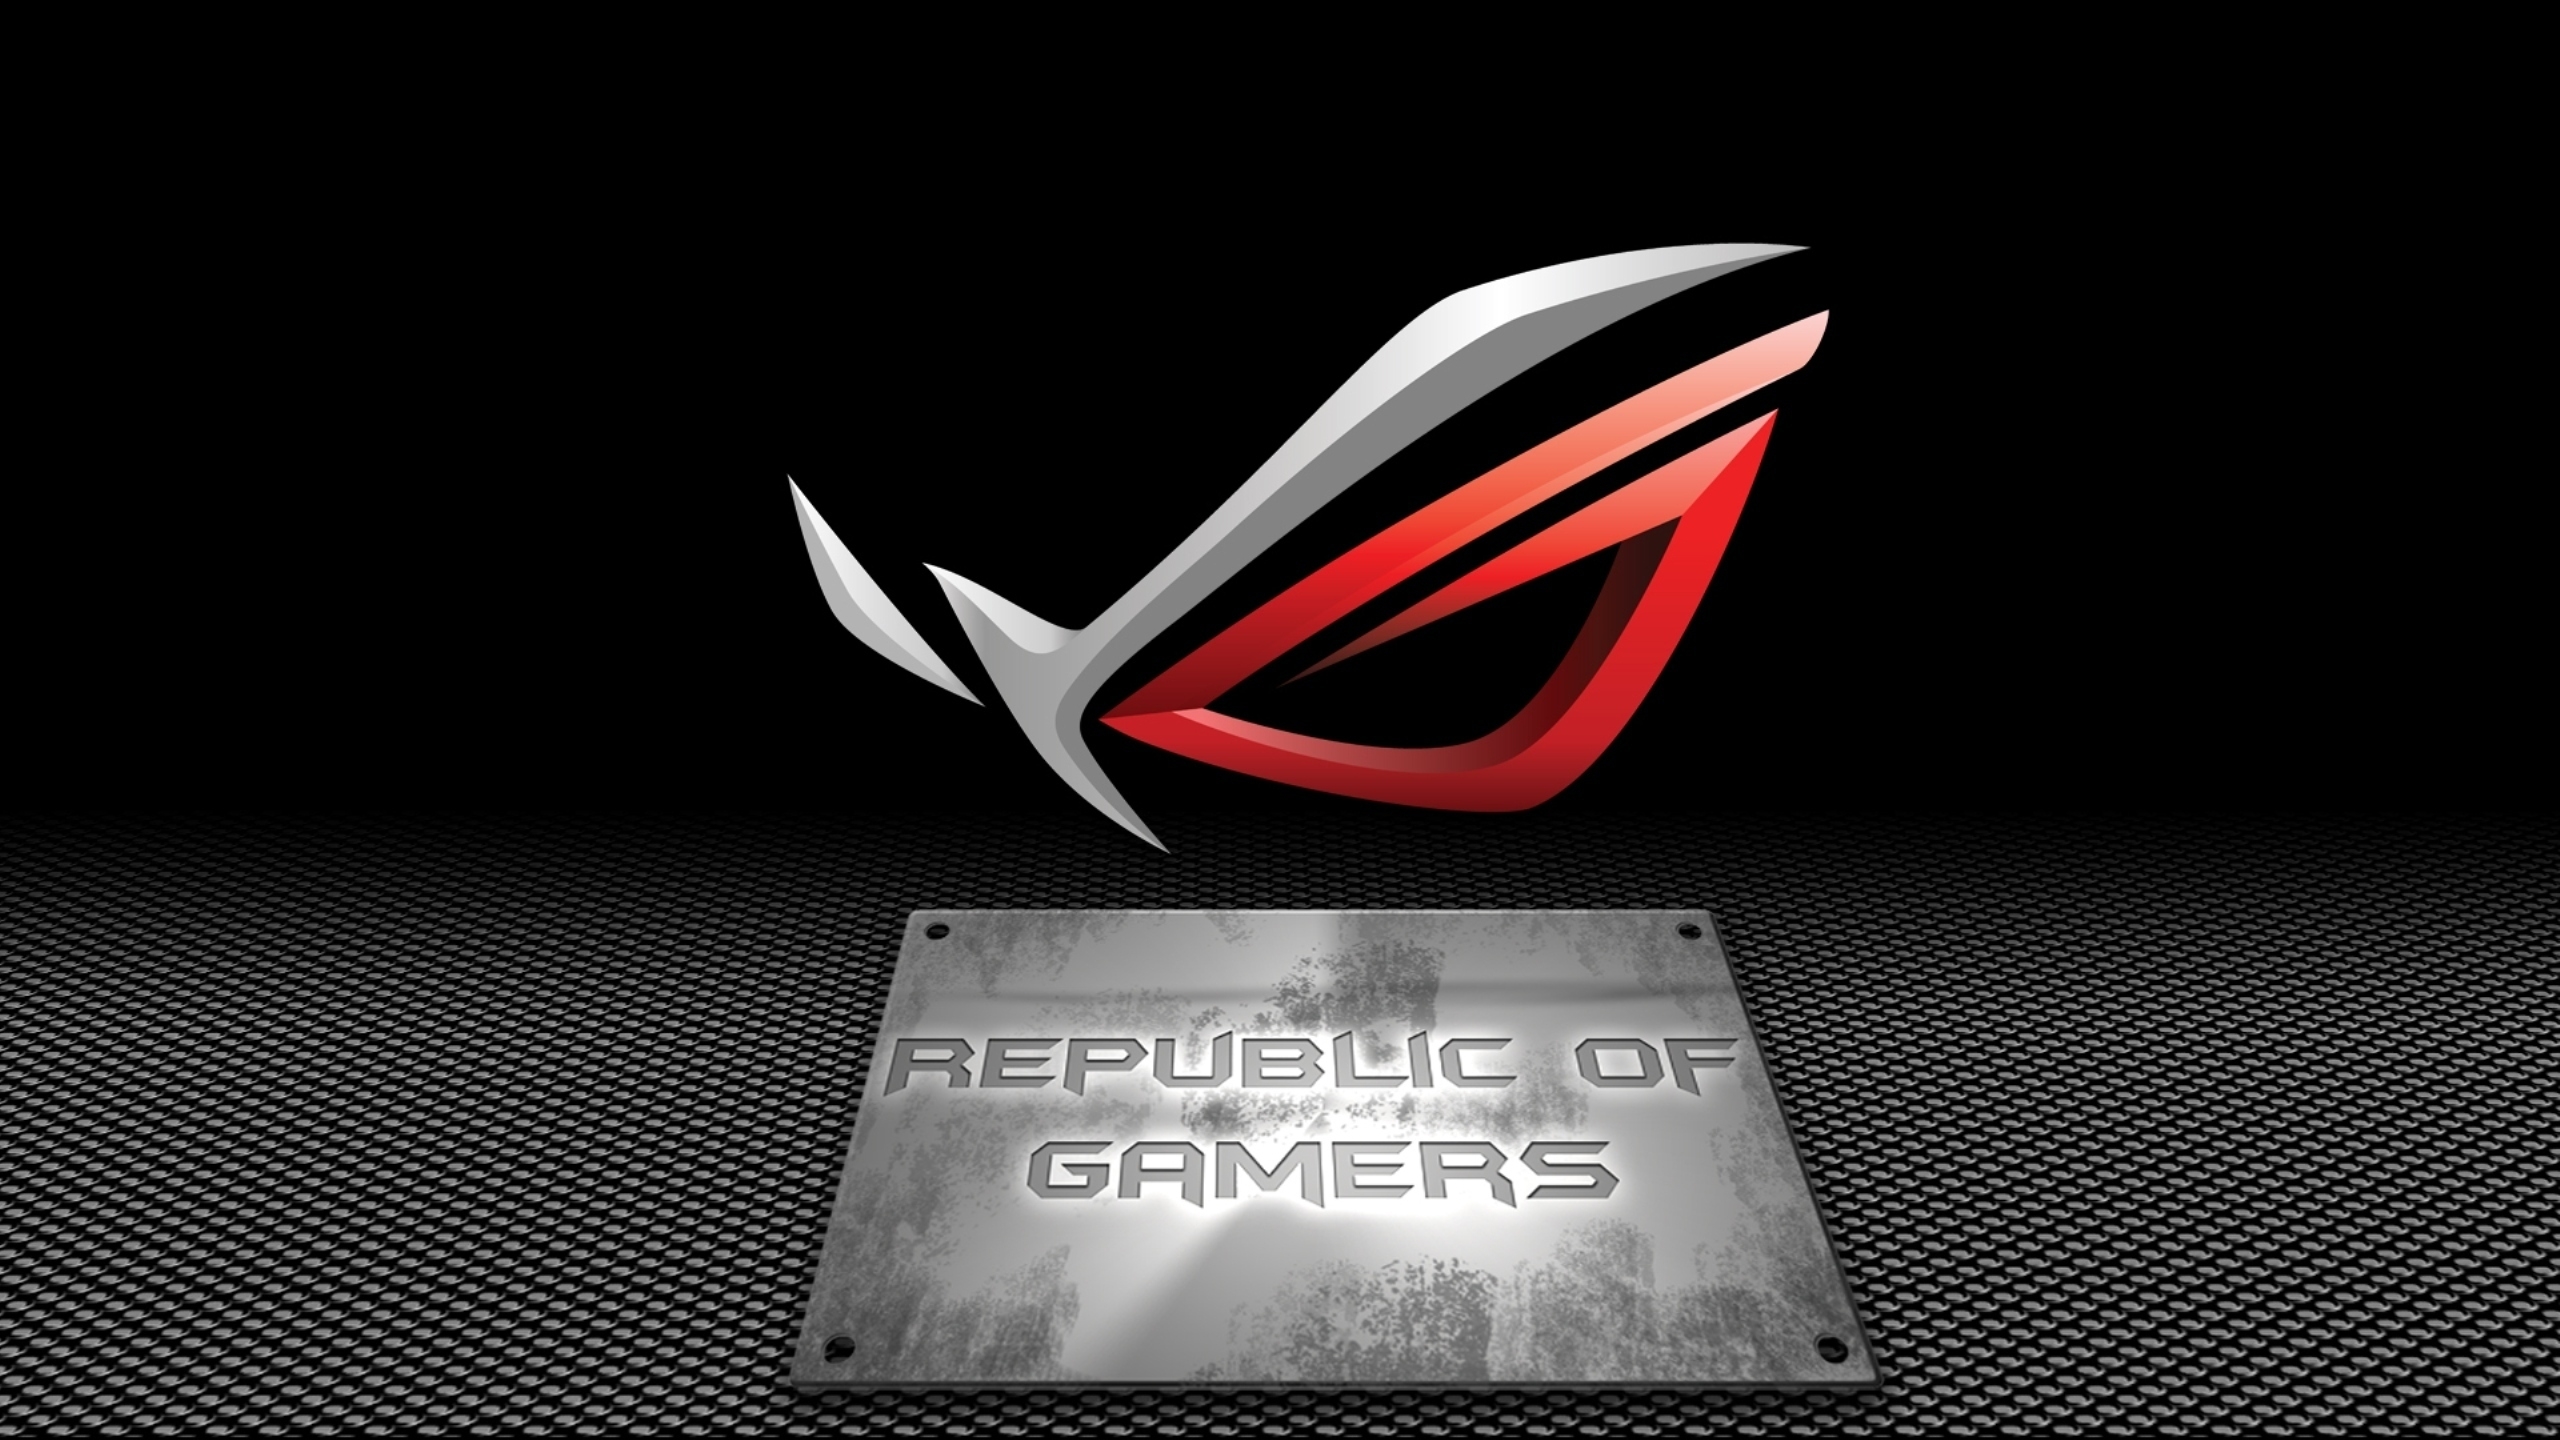 Republic of Gamers Asus for 2560x1440 HDTV resolution